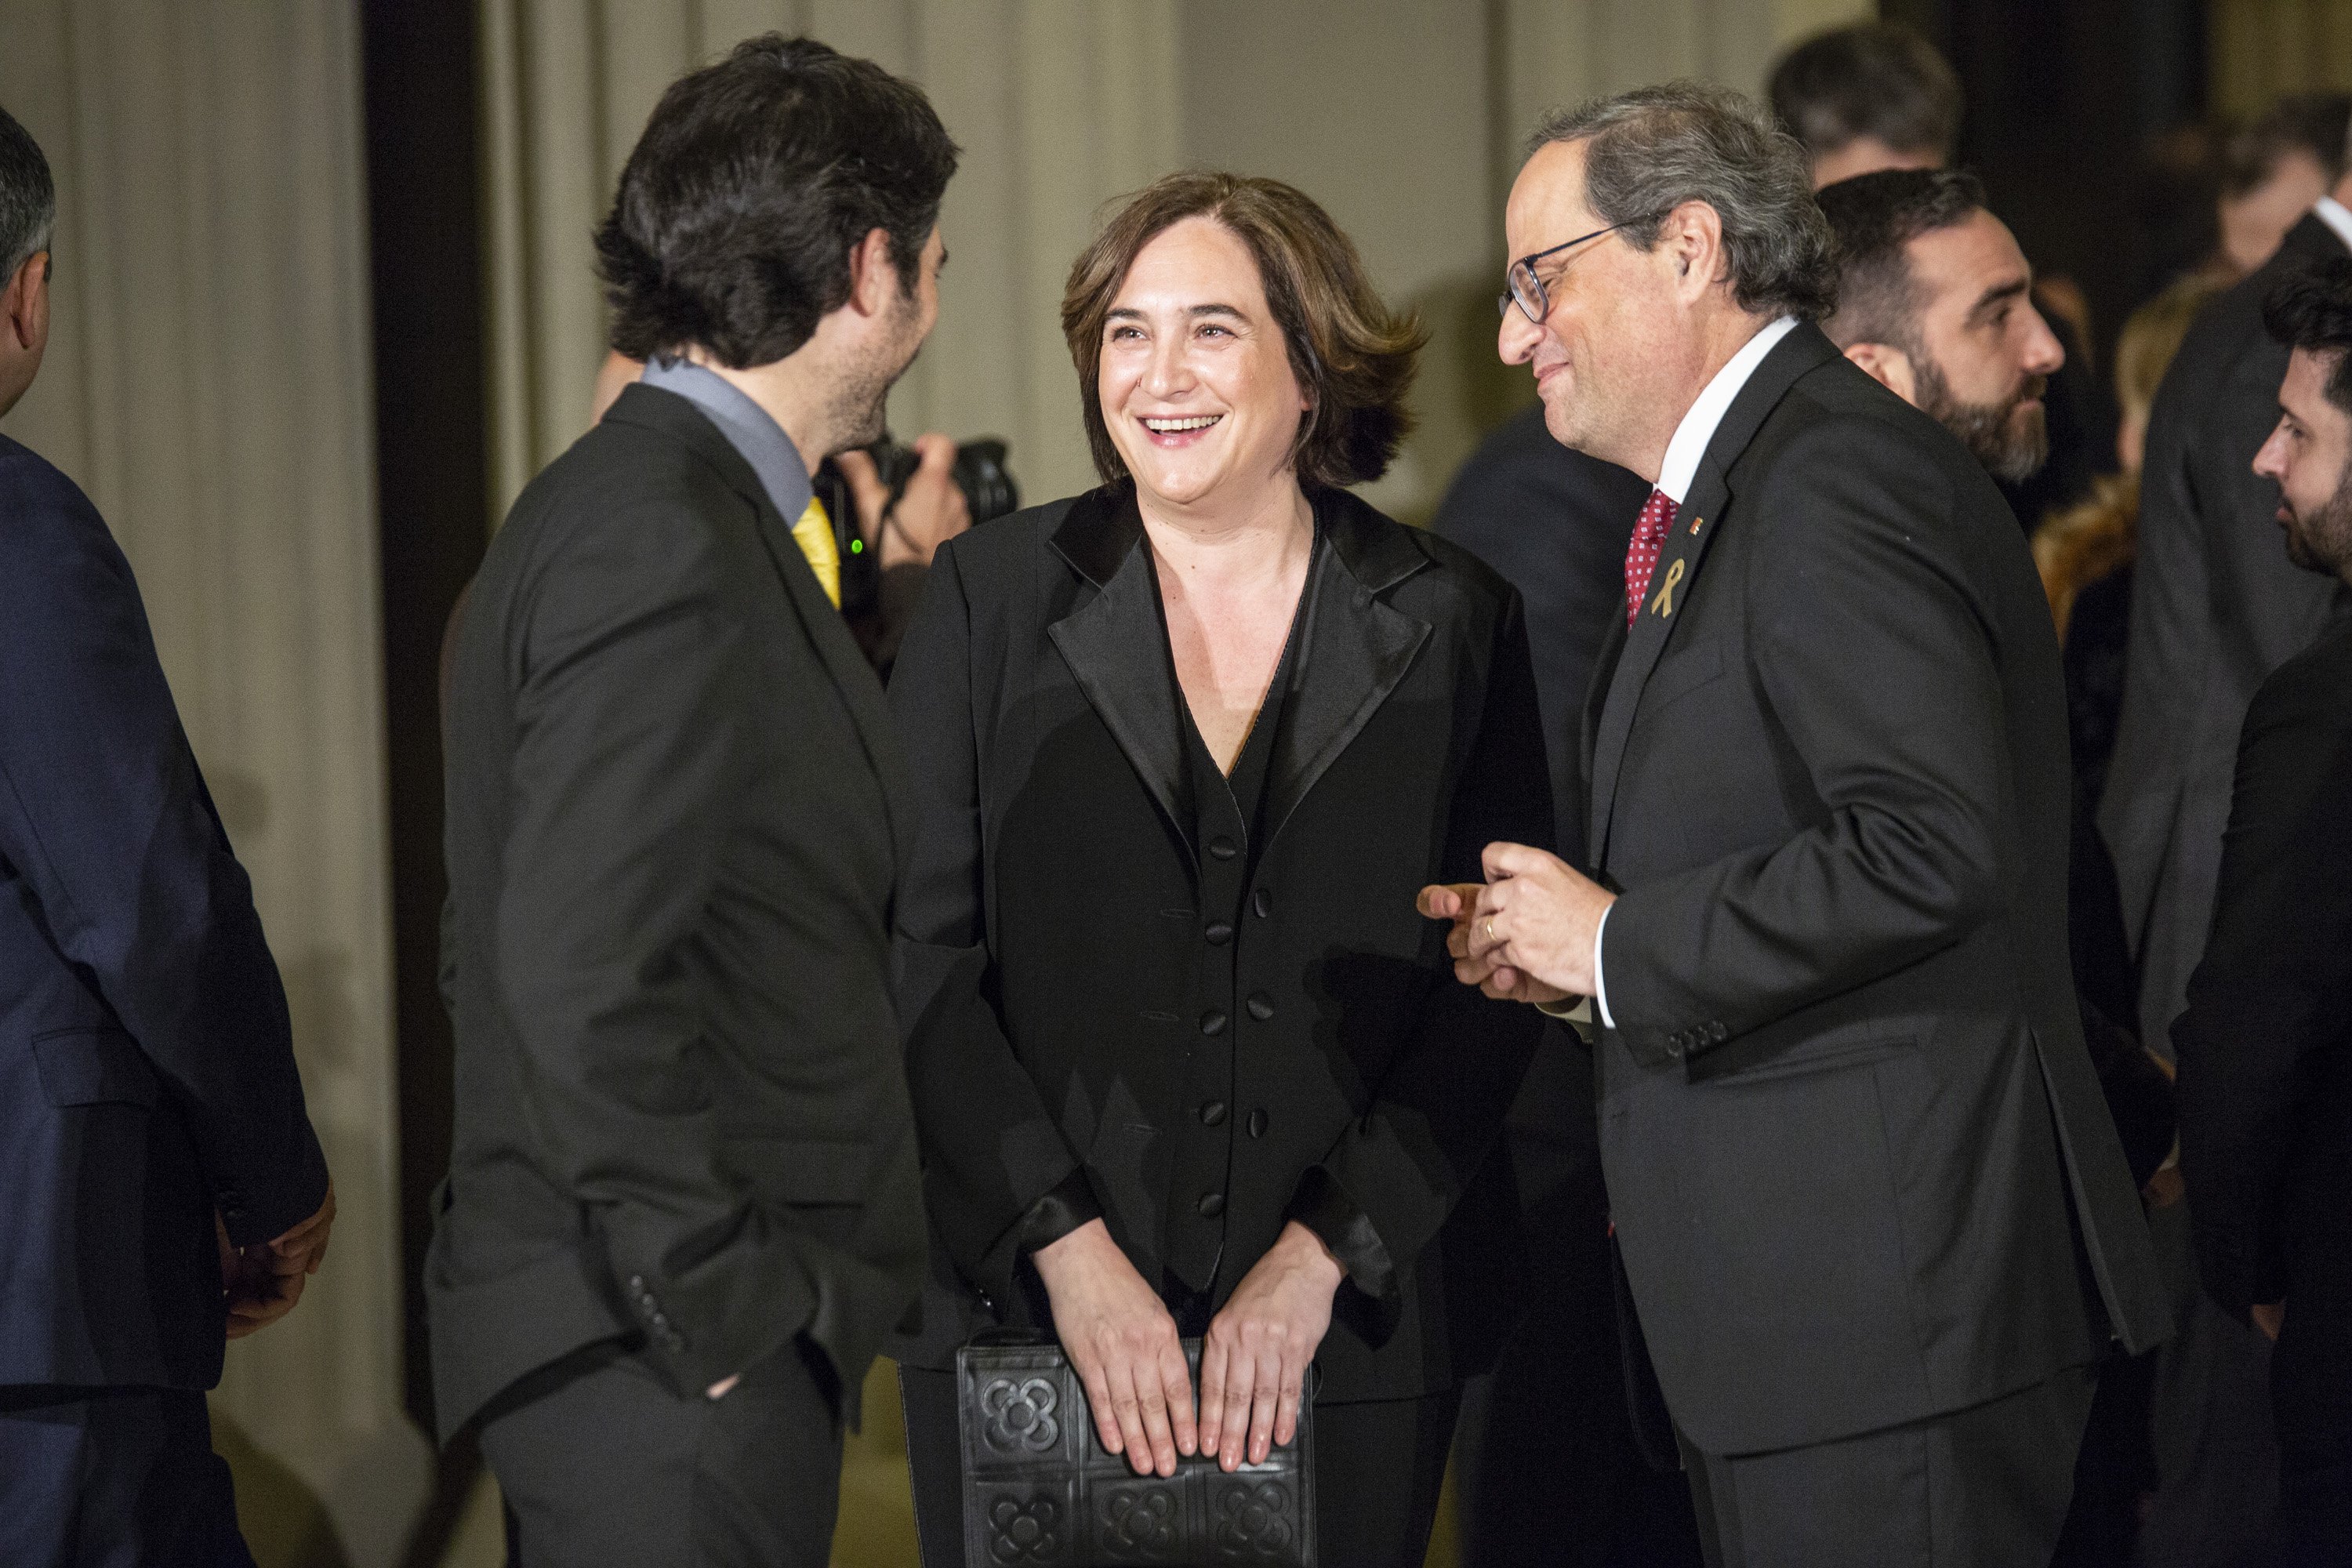 Quim Torra and Ada Colau walk out on formal greeting for Spain's king Felipe